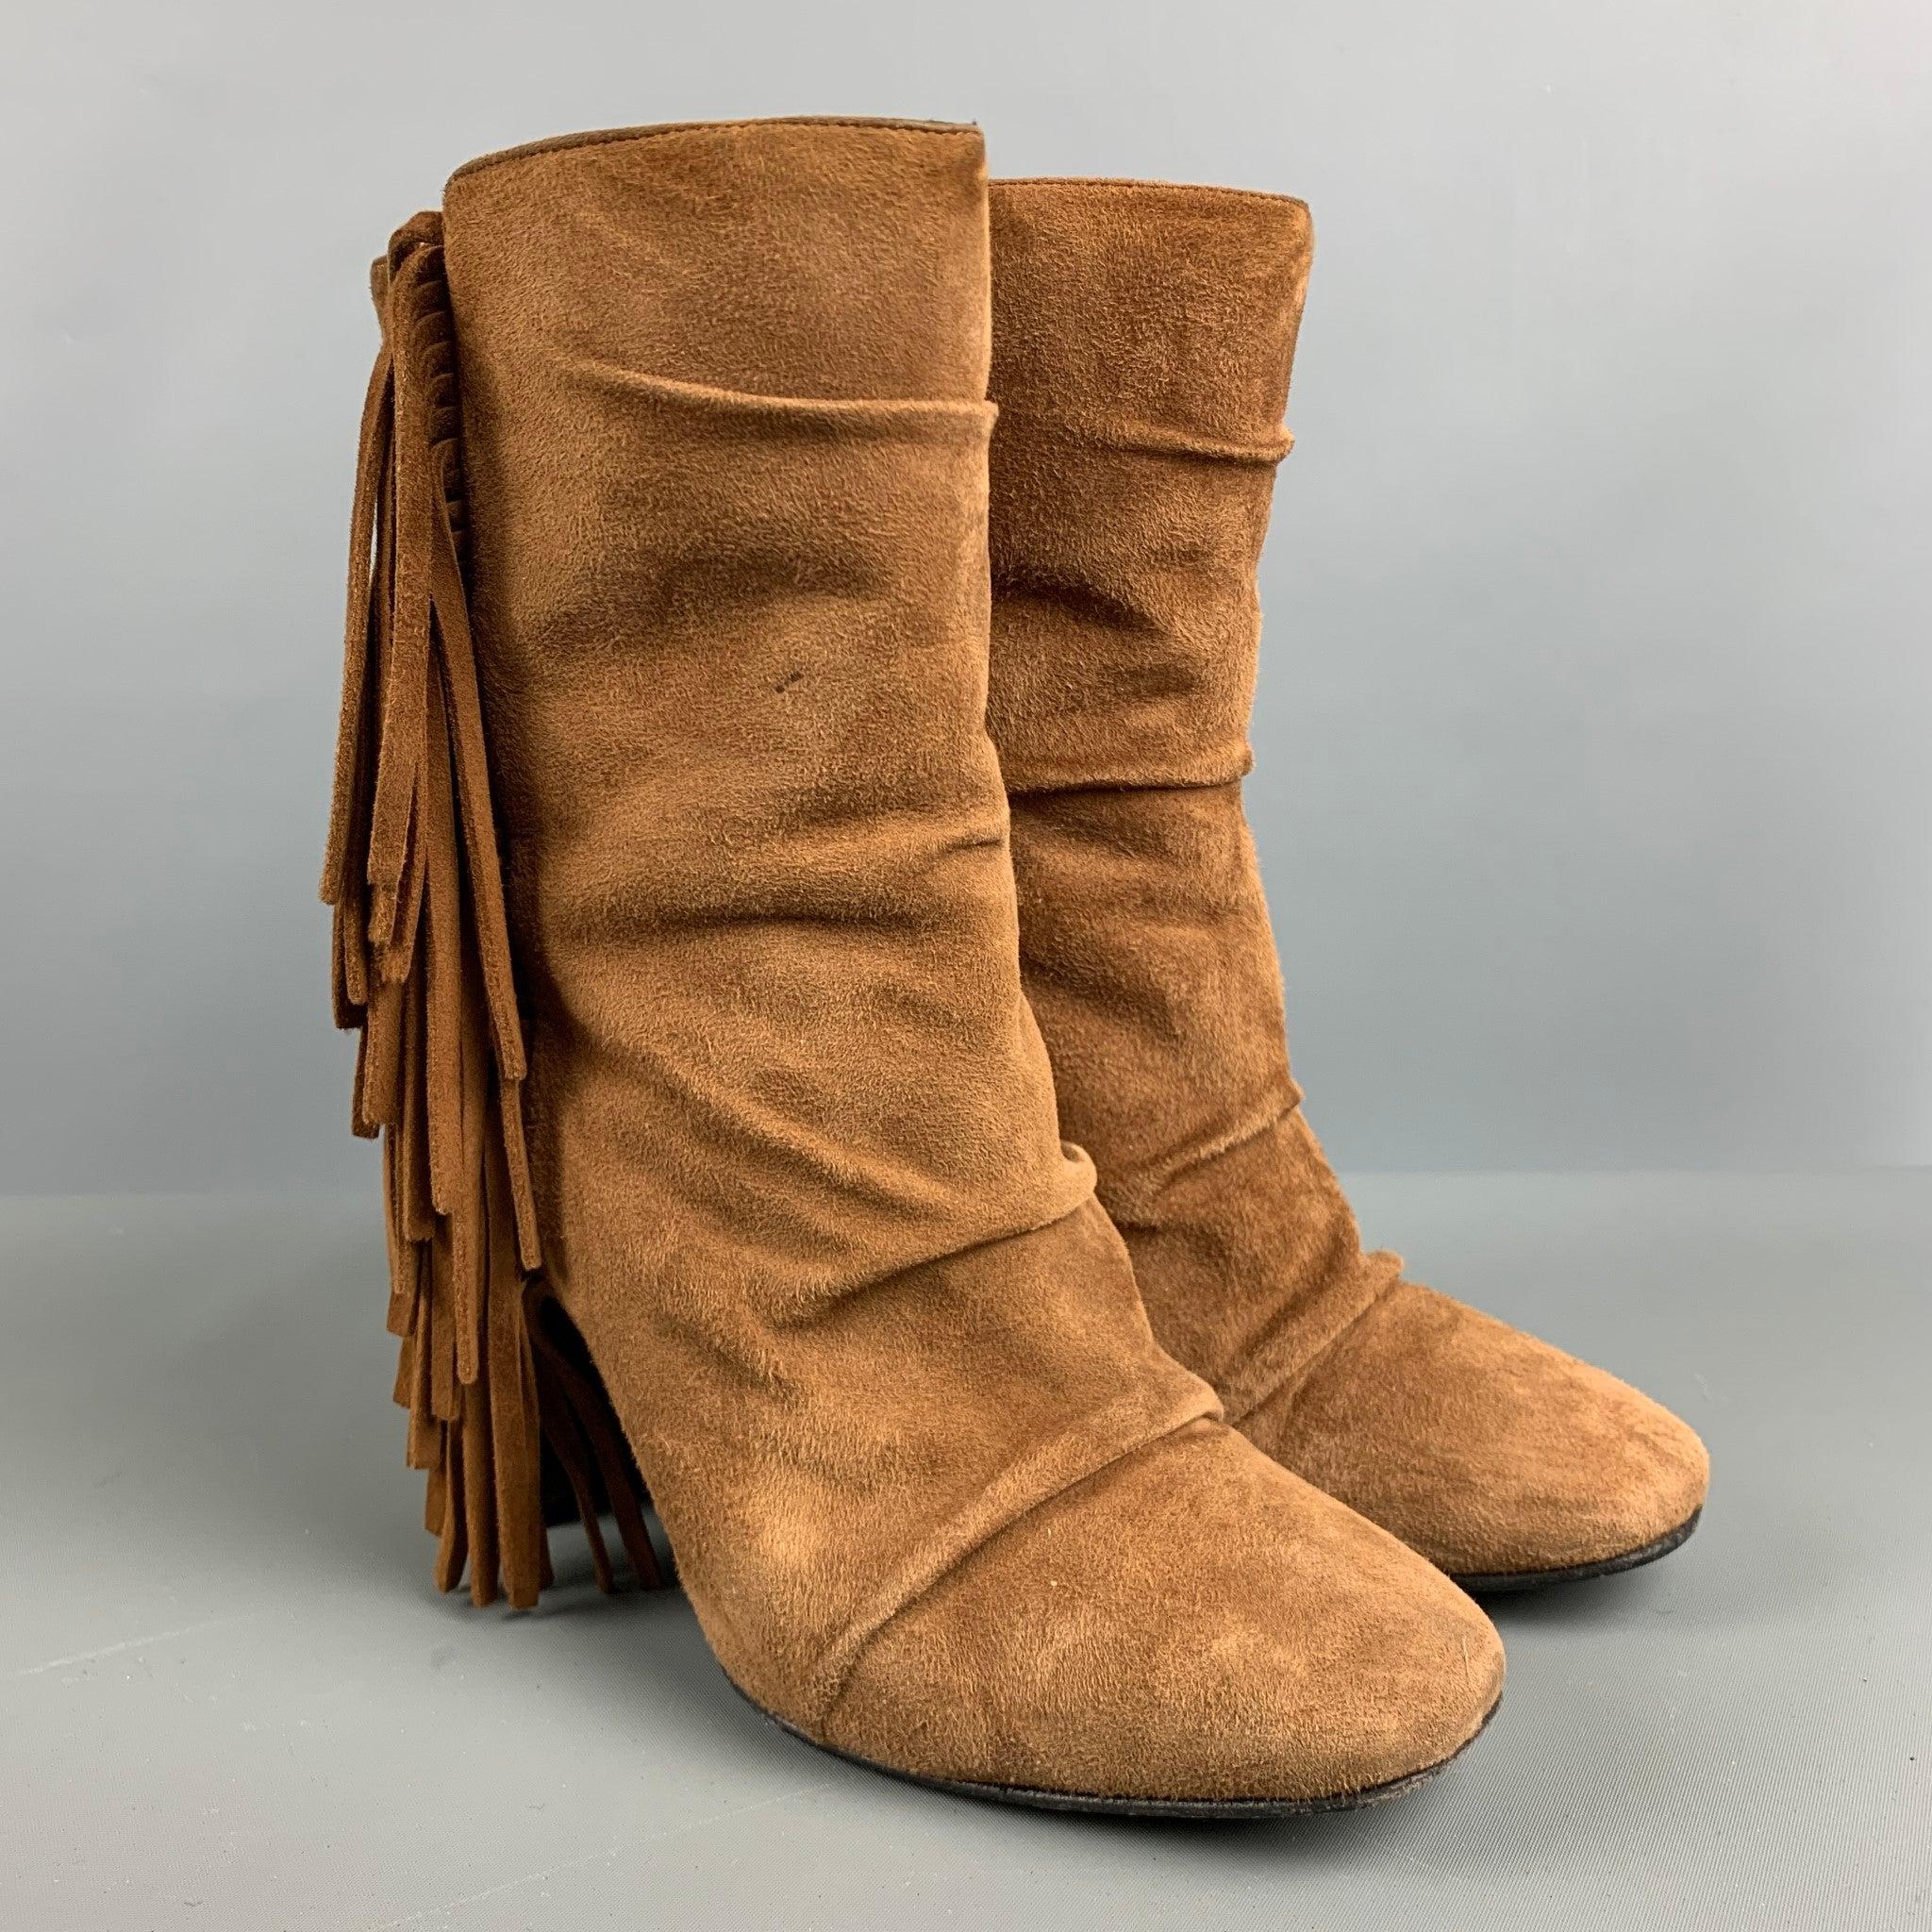 GIUSEPPE ZANOTTI boots comes in a brown suede featuring a fringe trim design and a slip on style. Made in Italy.Very Good Pre-Owned Condition. 

Marked:   S7085 37 1/2 0487 

Measurements: 
  Length: 8.5 inches Width: 3.75 inches Height: 9.25 inches